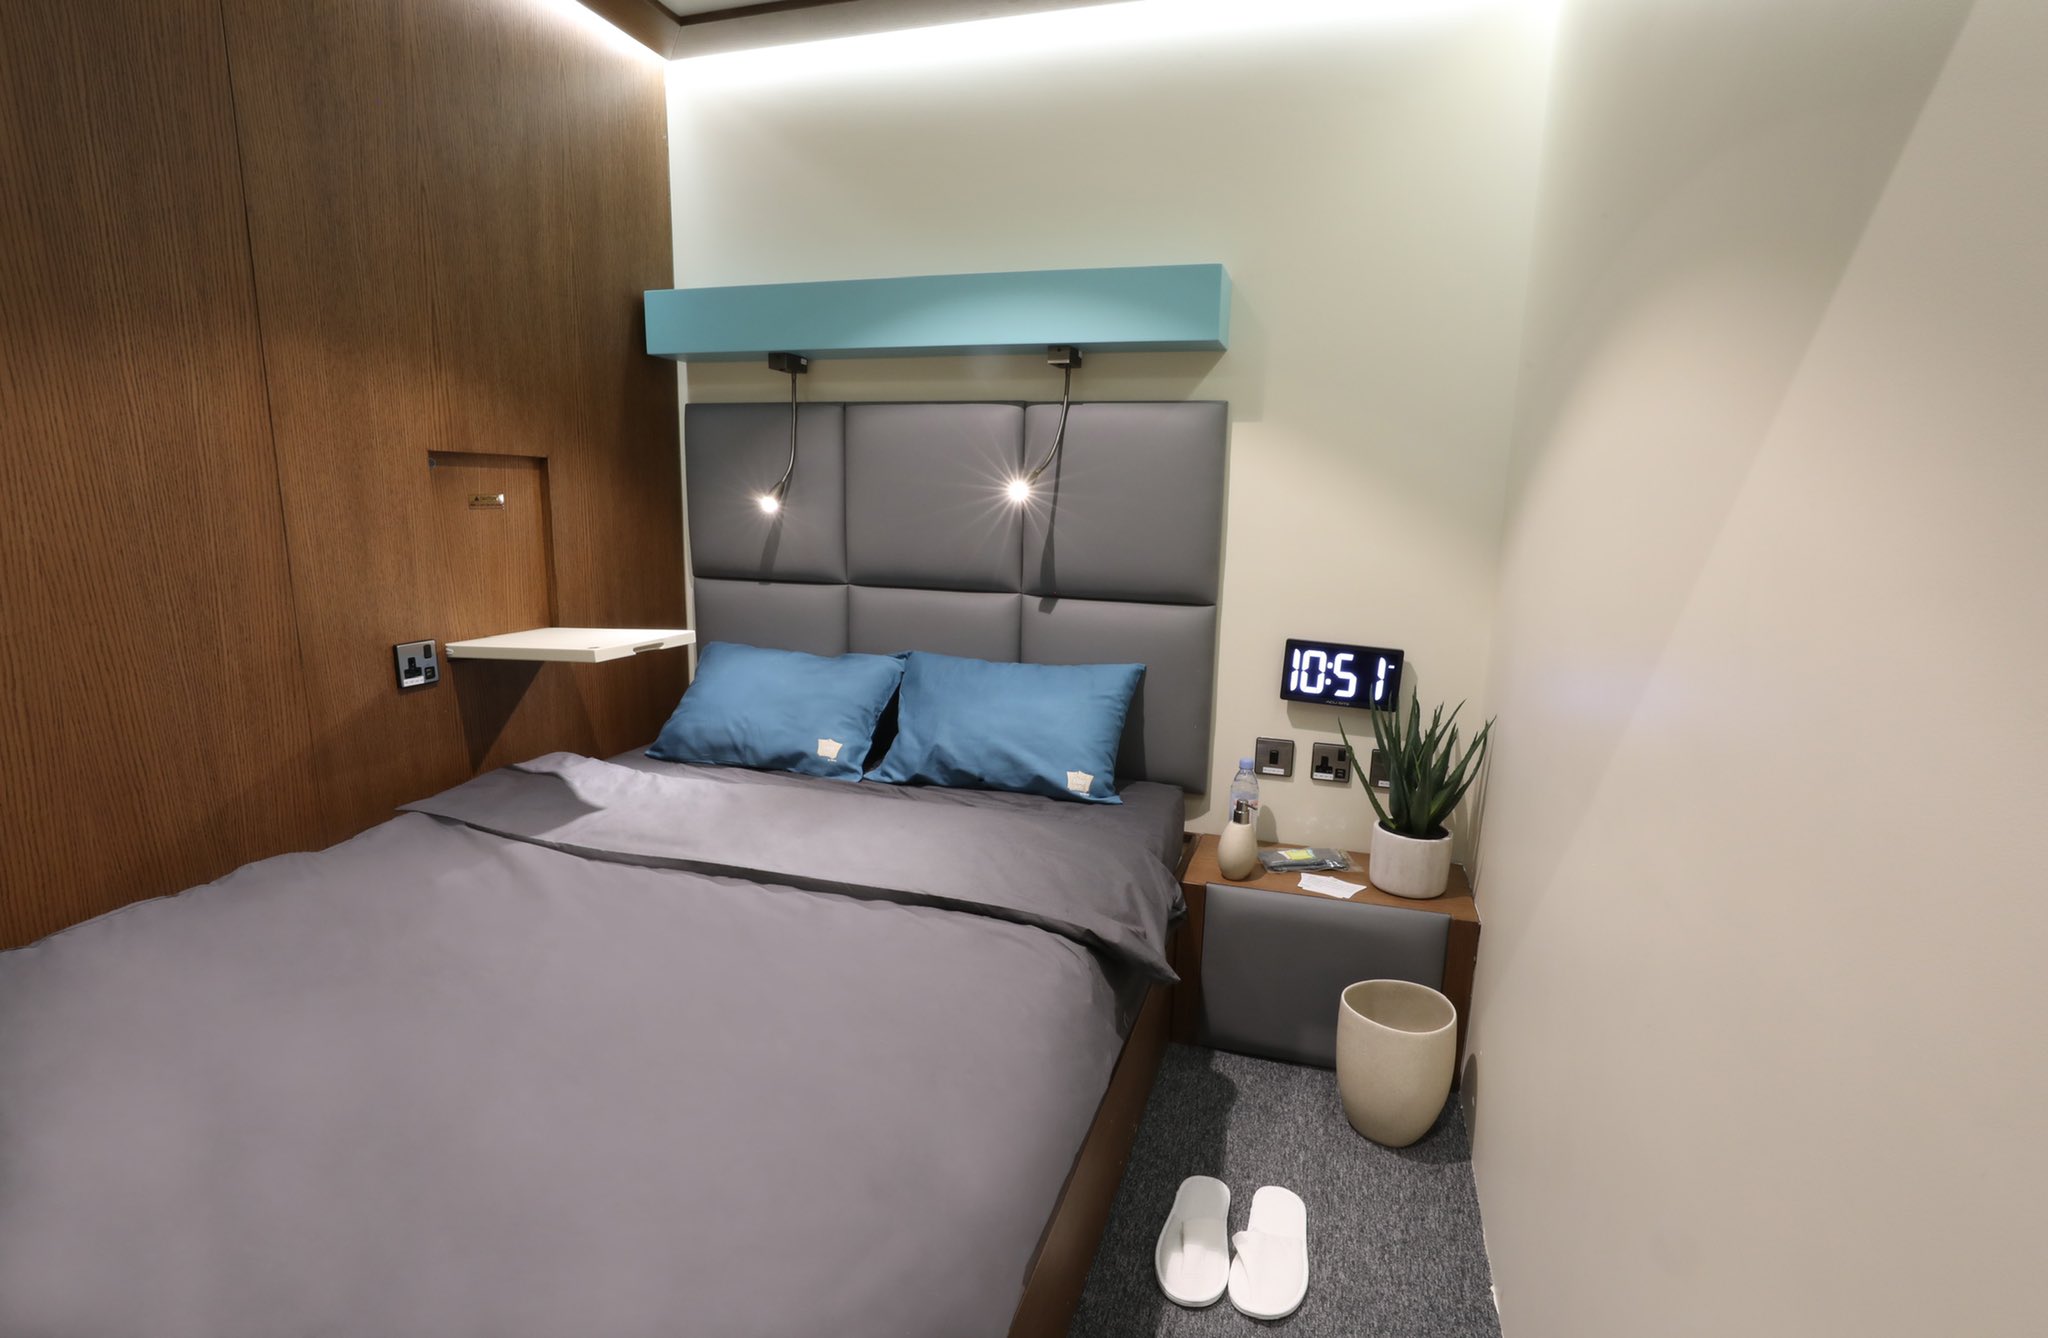 Qatar Airways Our Friends At Hiaqatar Have Launched A New Service For Transiting Passengers In Need Of A Good Sleep It Has Opened A Sleepnfly Lounge Of Pods And Cabins